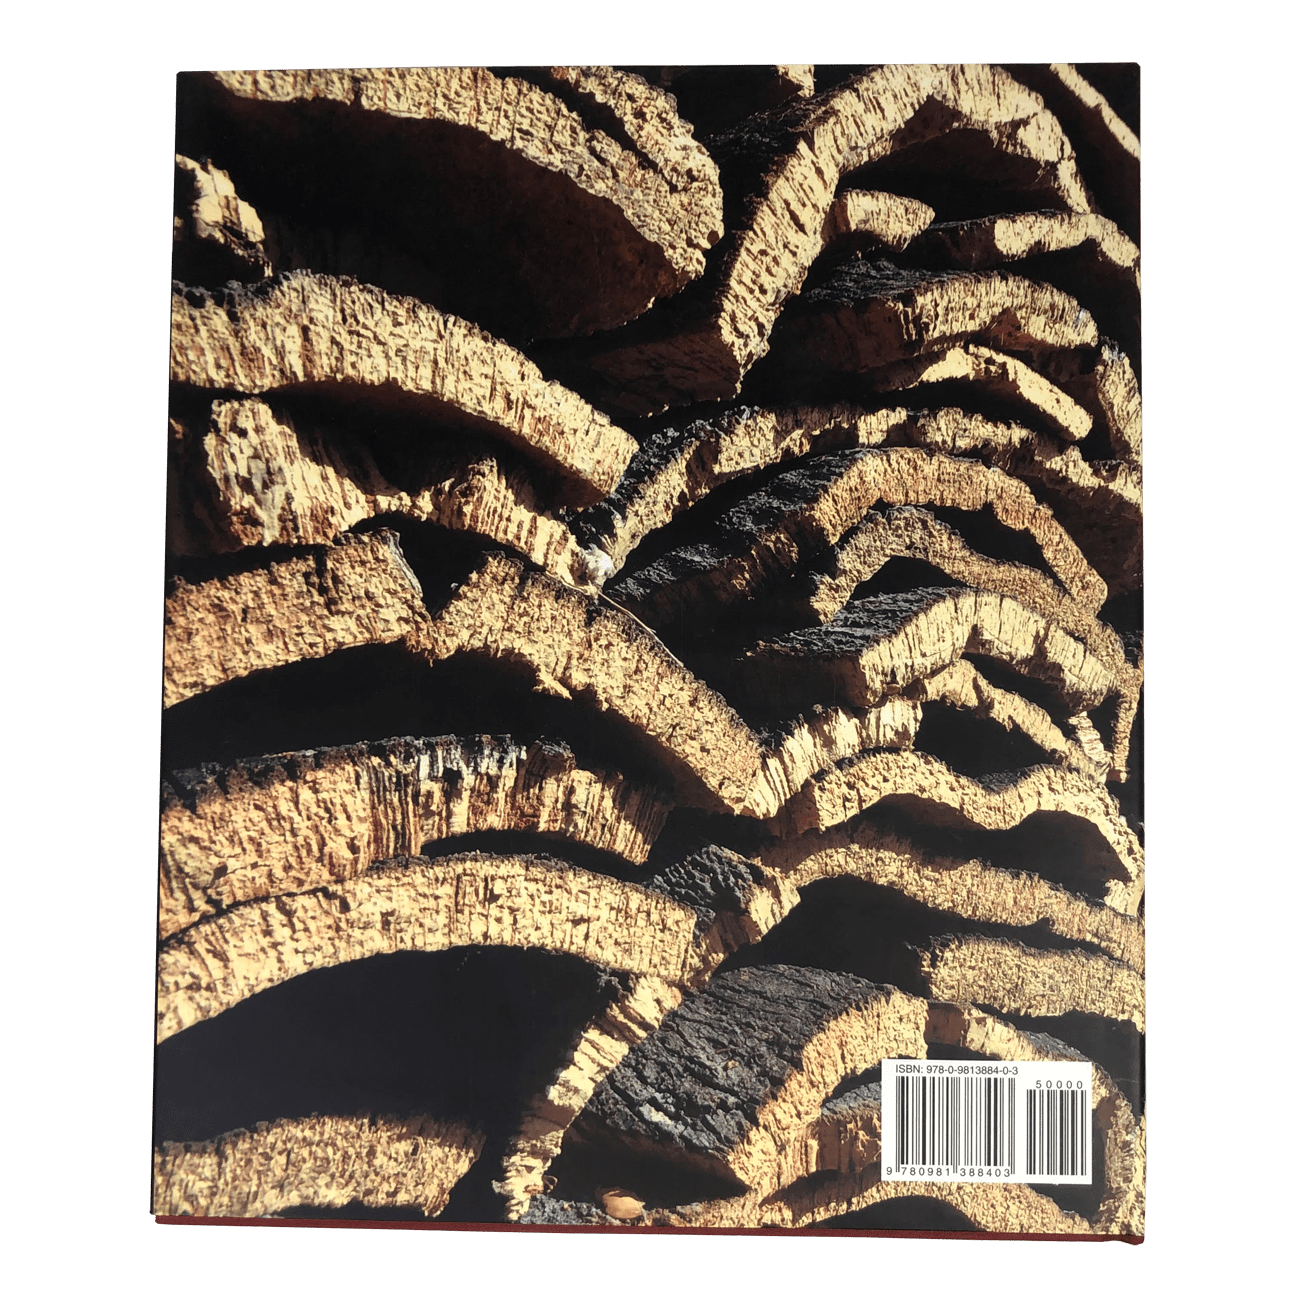 Back cover of the House of Cork book showing cork bark stacked for drying.